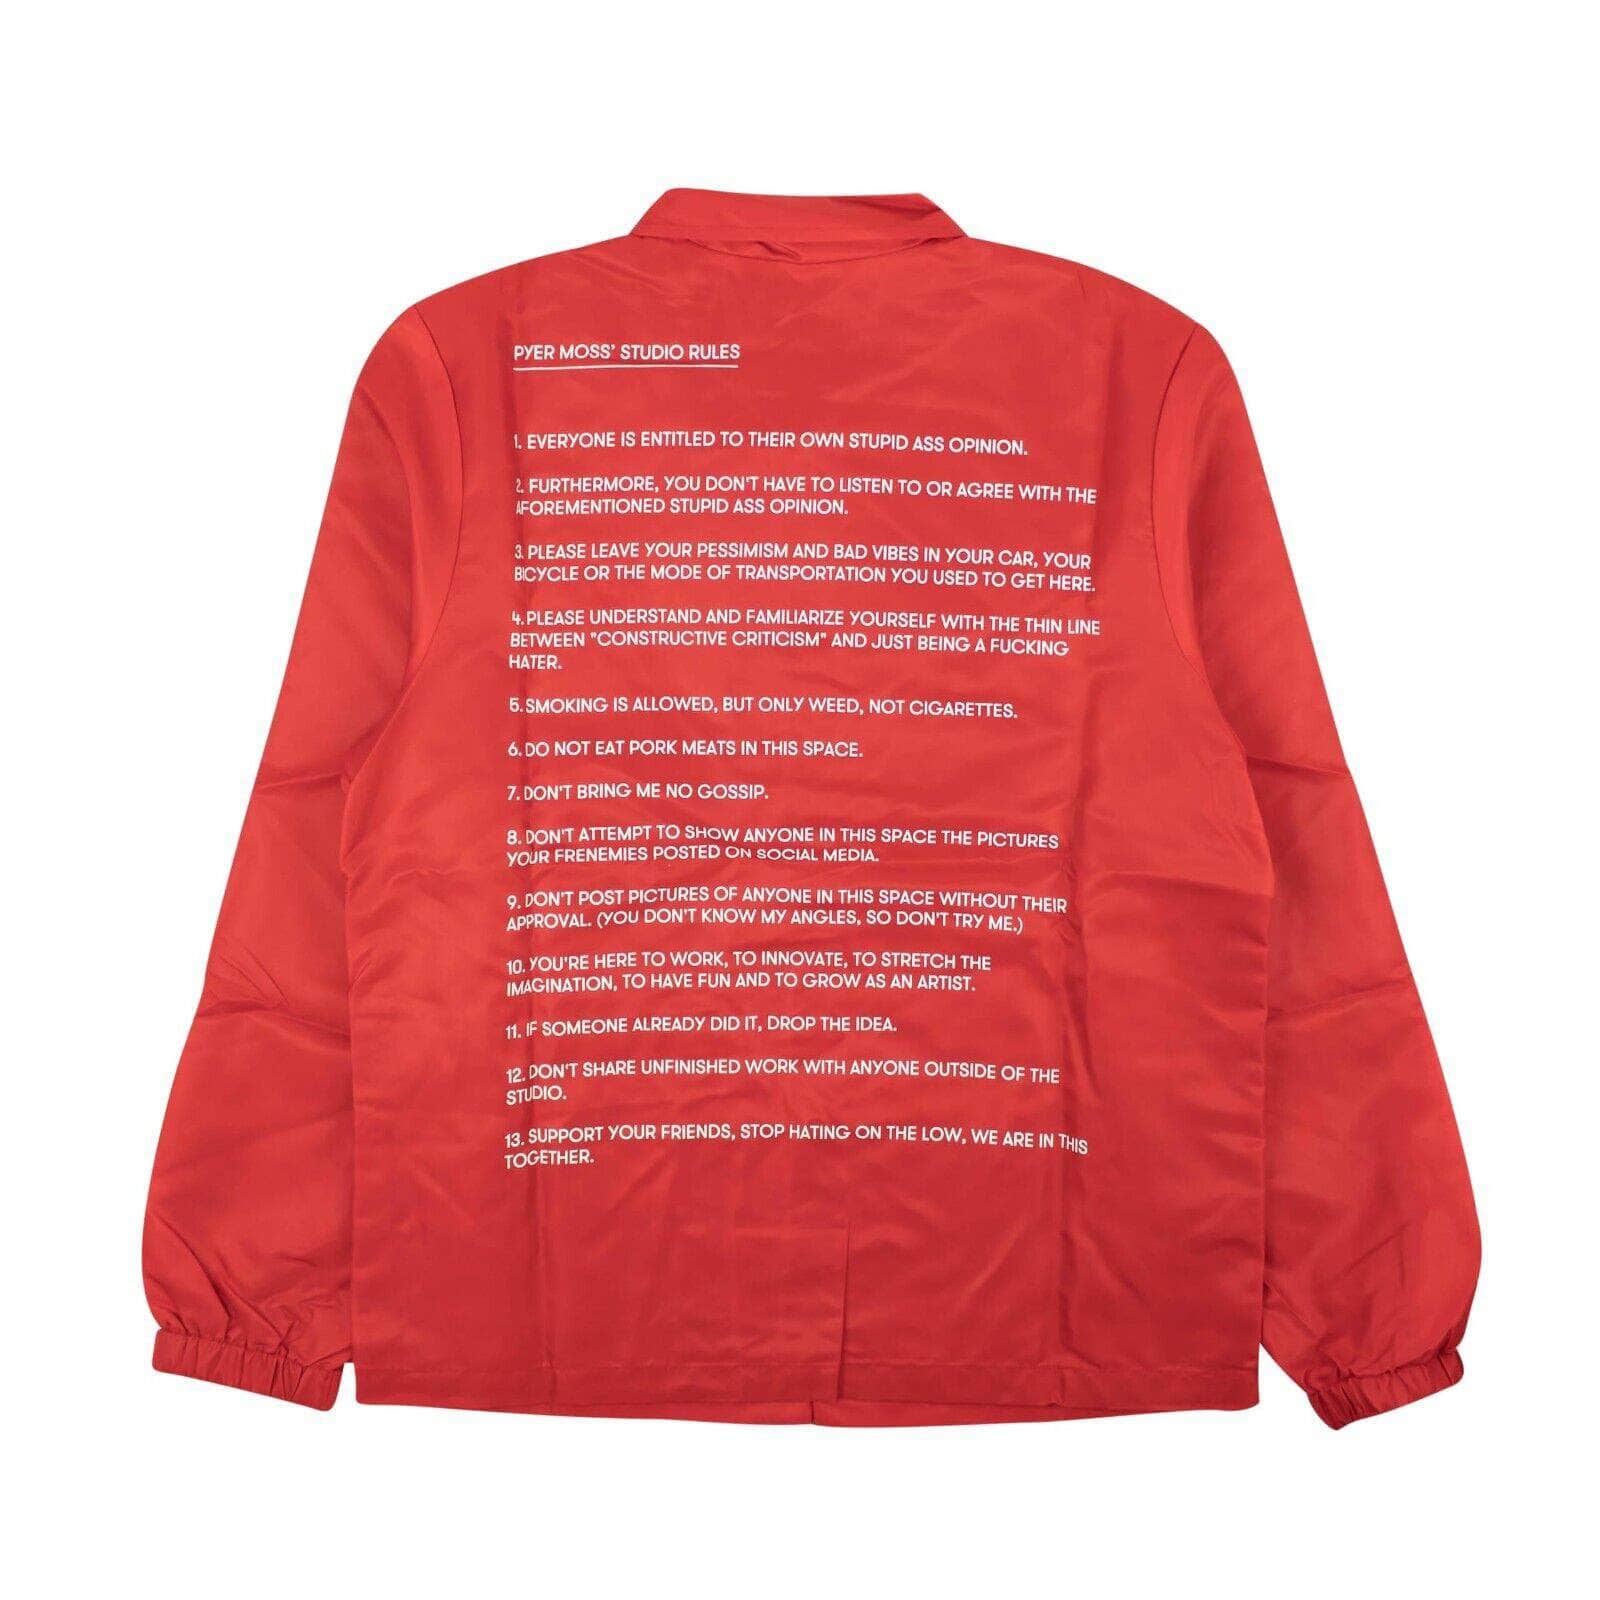 PYER MOSS 250-500, channelenable-all, chicmi, couponcollection, gender-mens, main-clothing, mens-shoes, mens-work-jackets, pyer-moss, size-l, size-m, size-s, size-xl, size-xxl Red Satin Snap Jacket